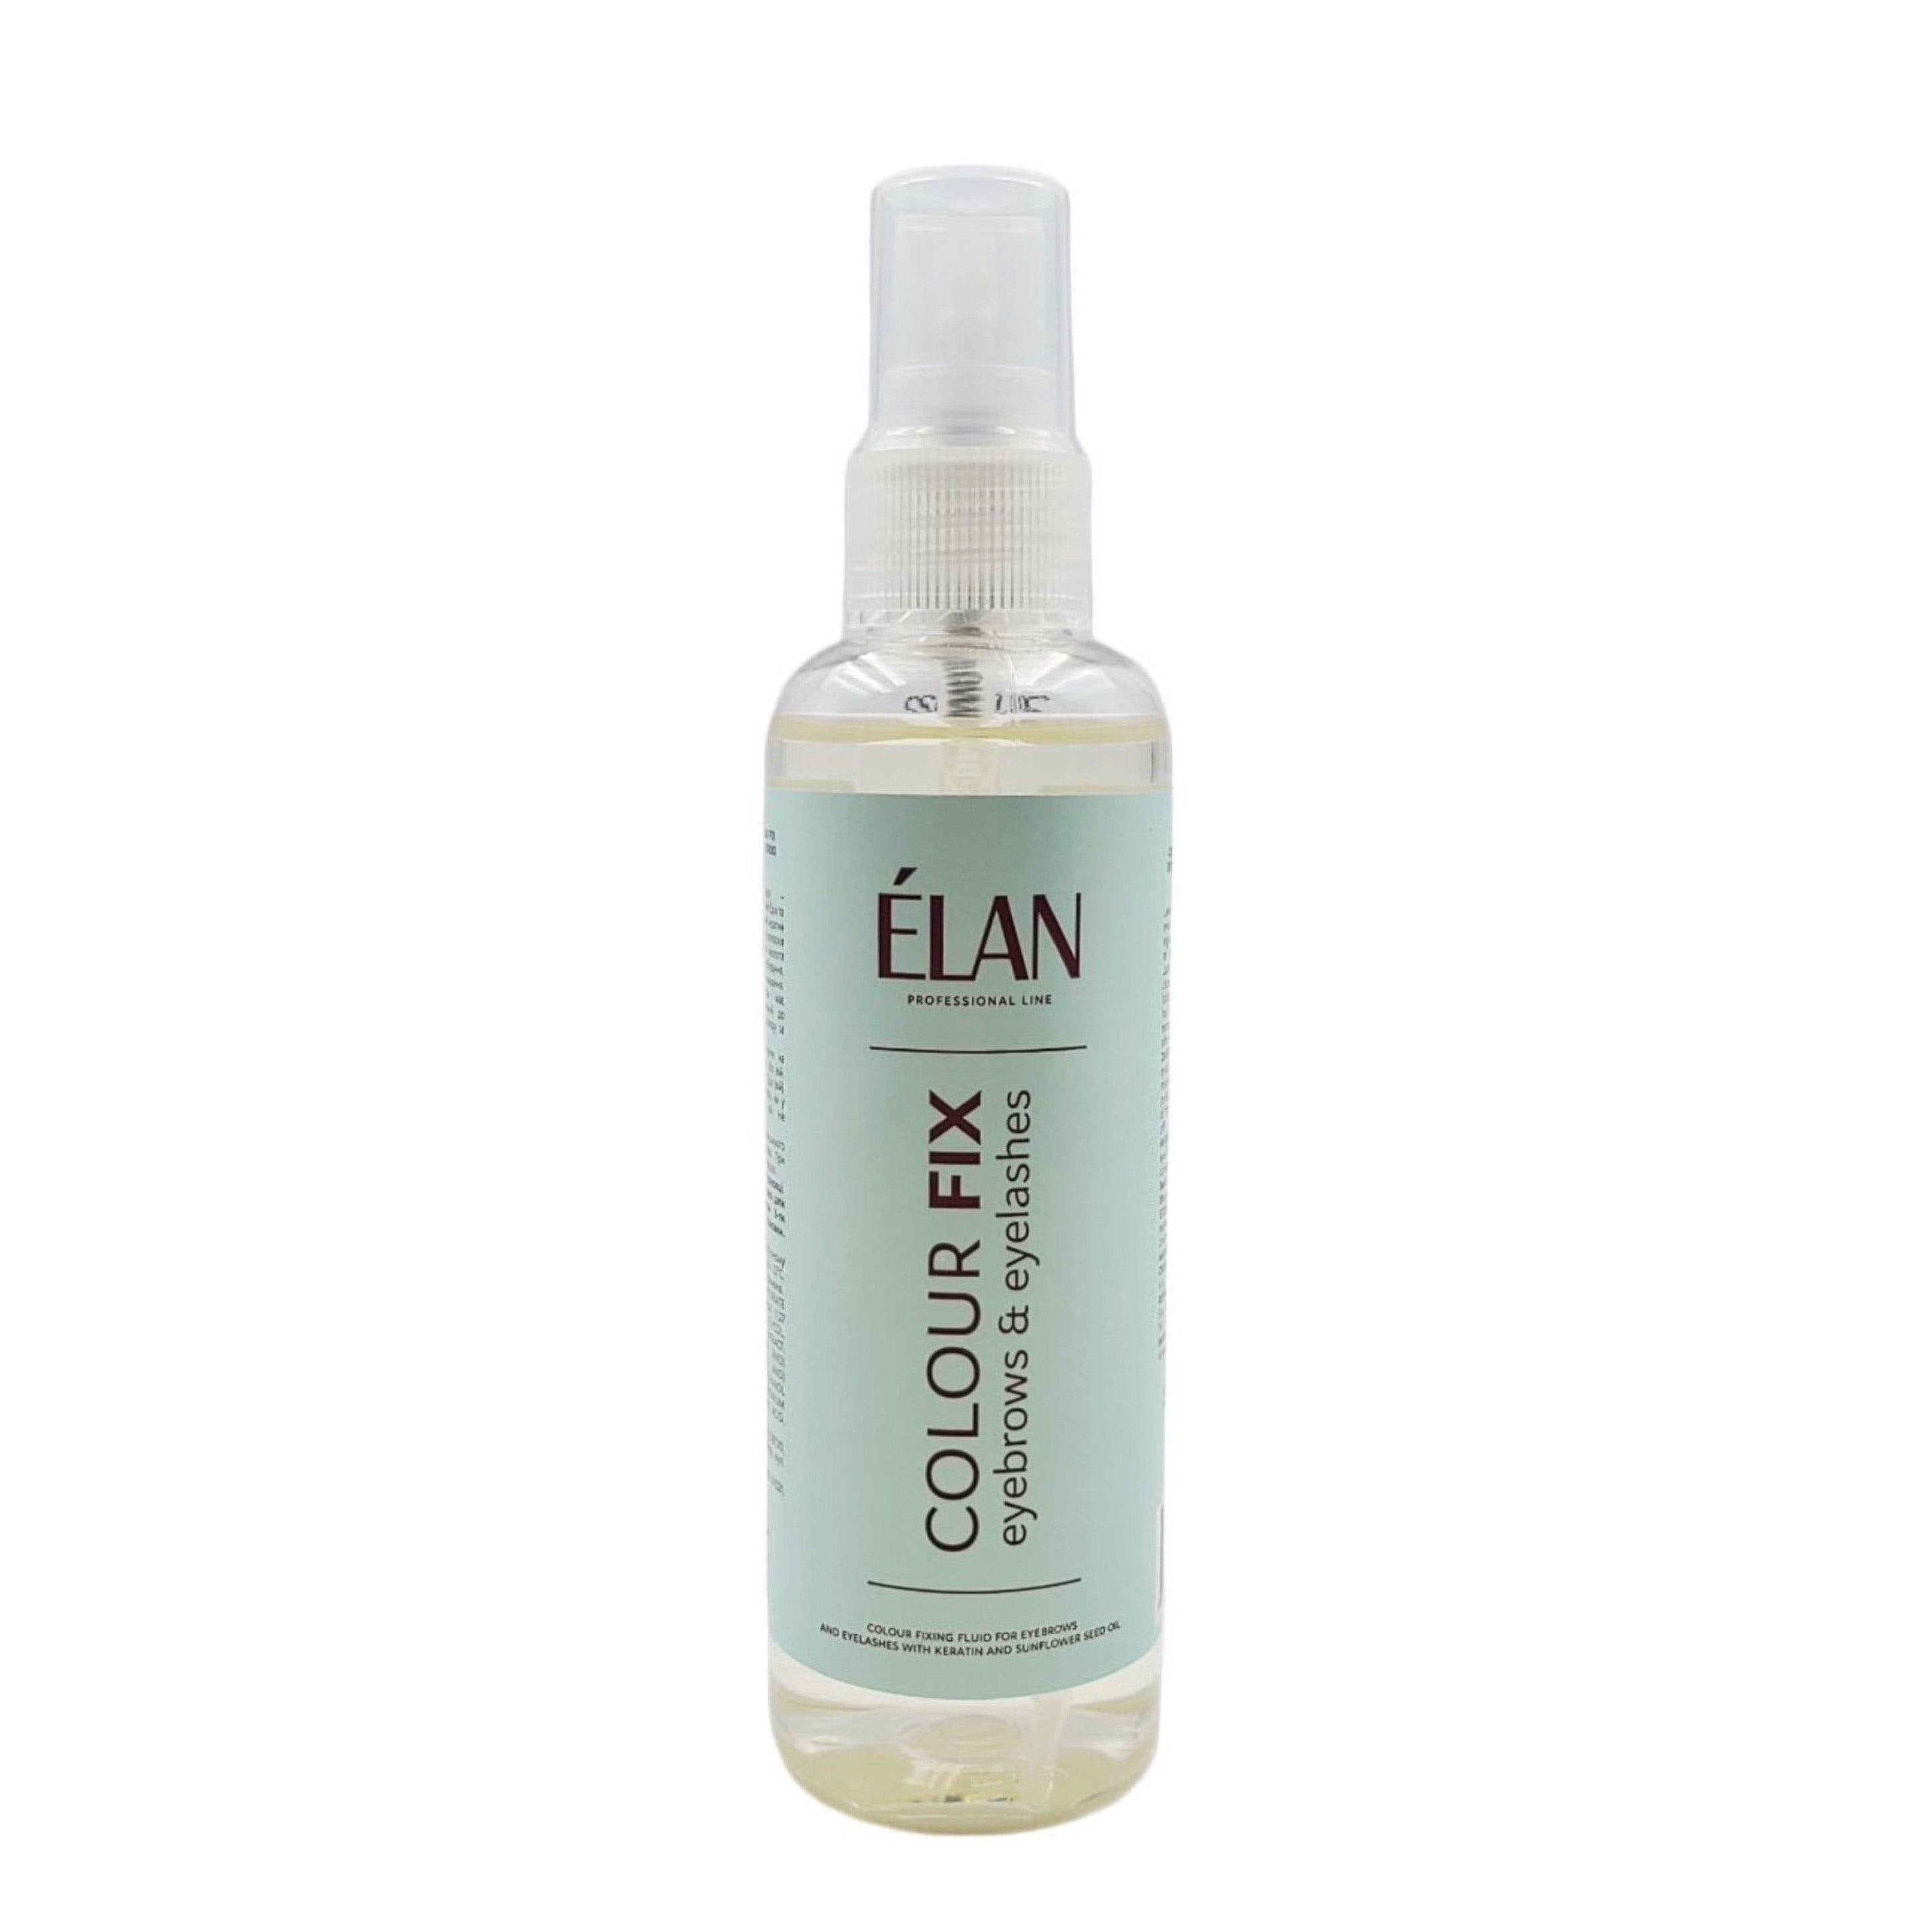 Elan Coulour Fix for Eyebrows and Eyelashes